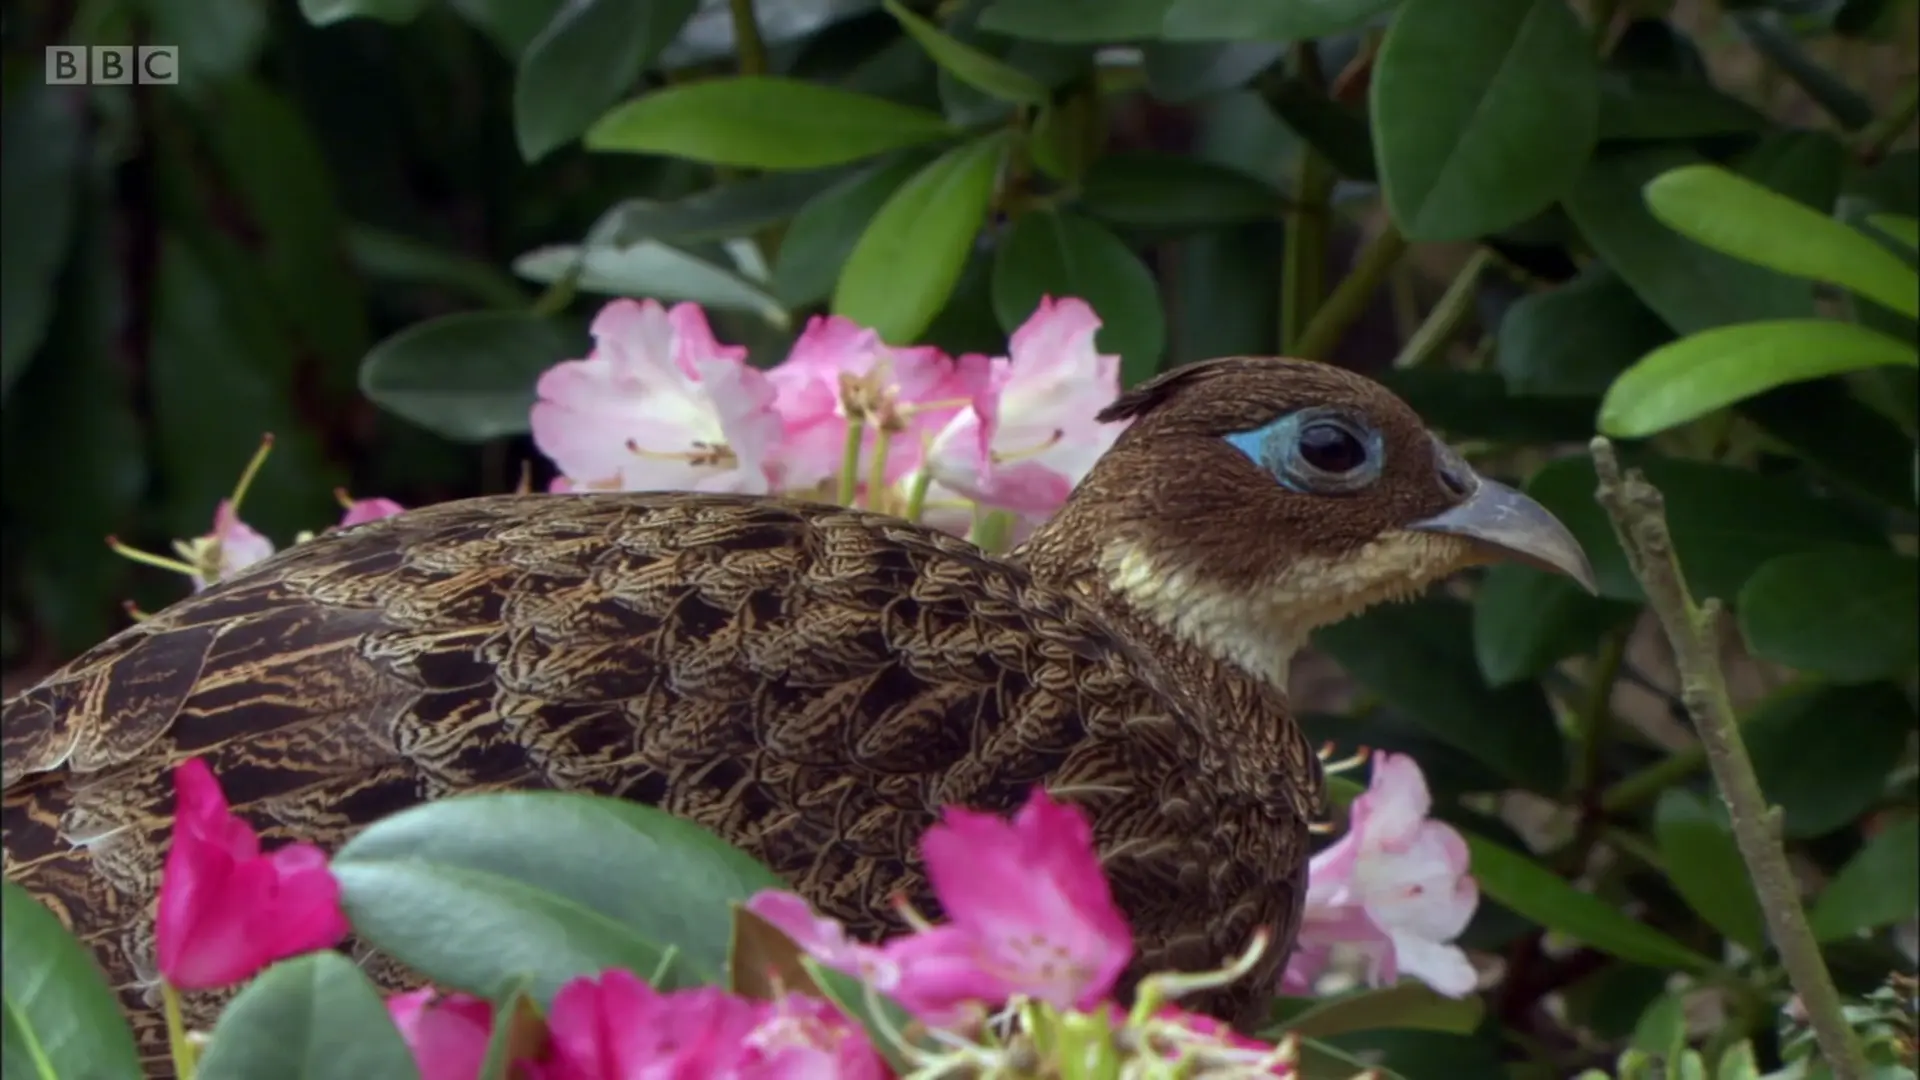 Himalayan monal (Lophophorus impejanus) as shown in Planet Earth - Mountains